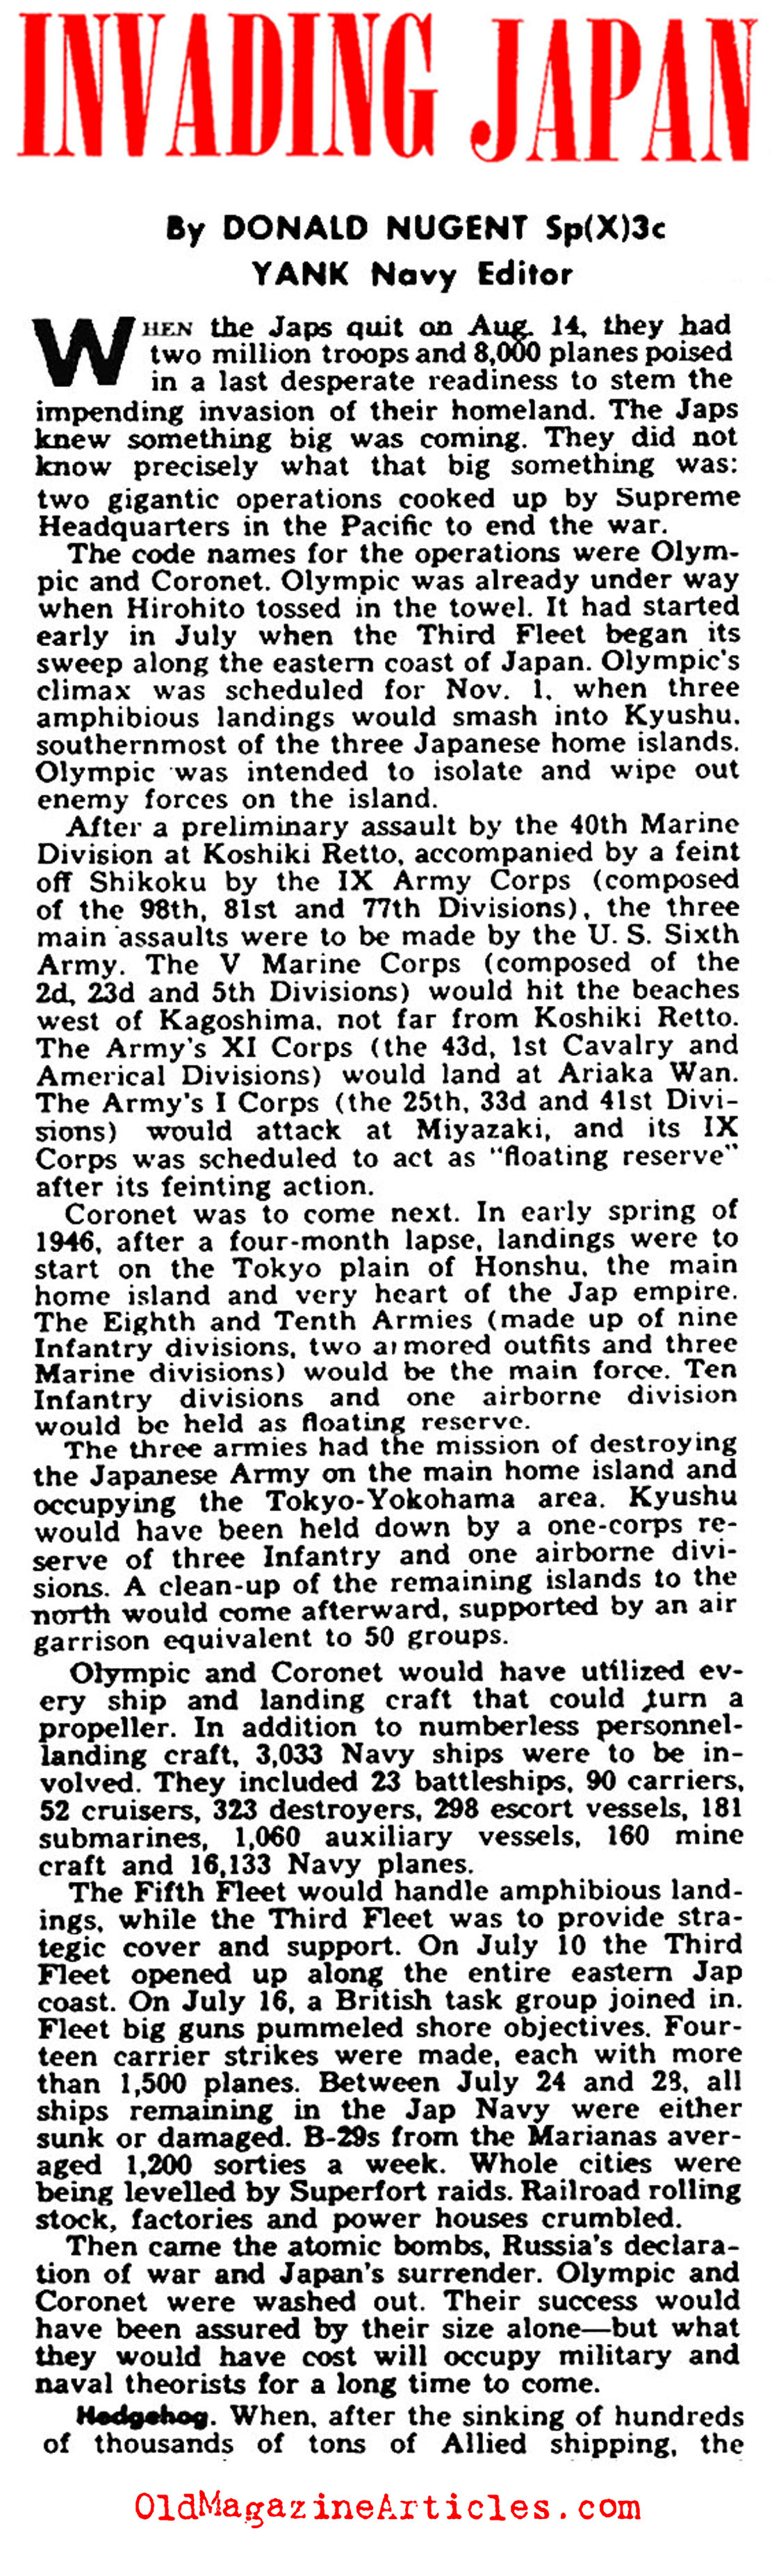 The Planned Invasion of Japan (Yank Magazine, 1945)